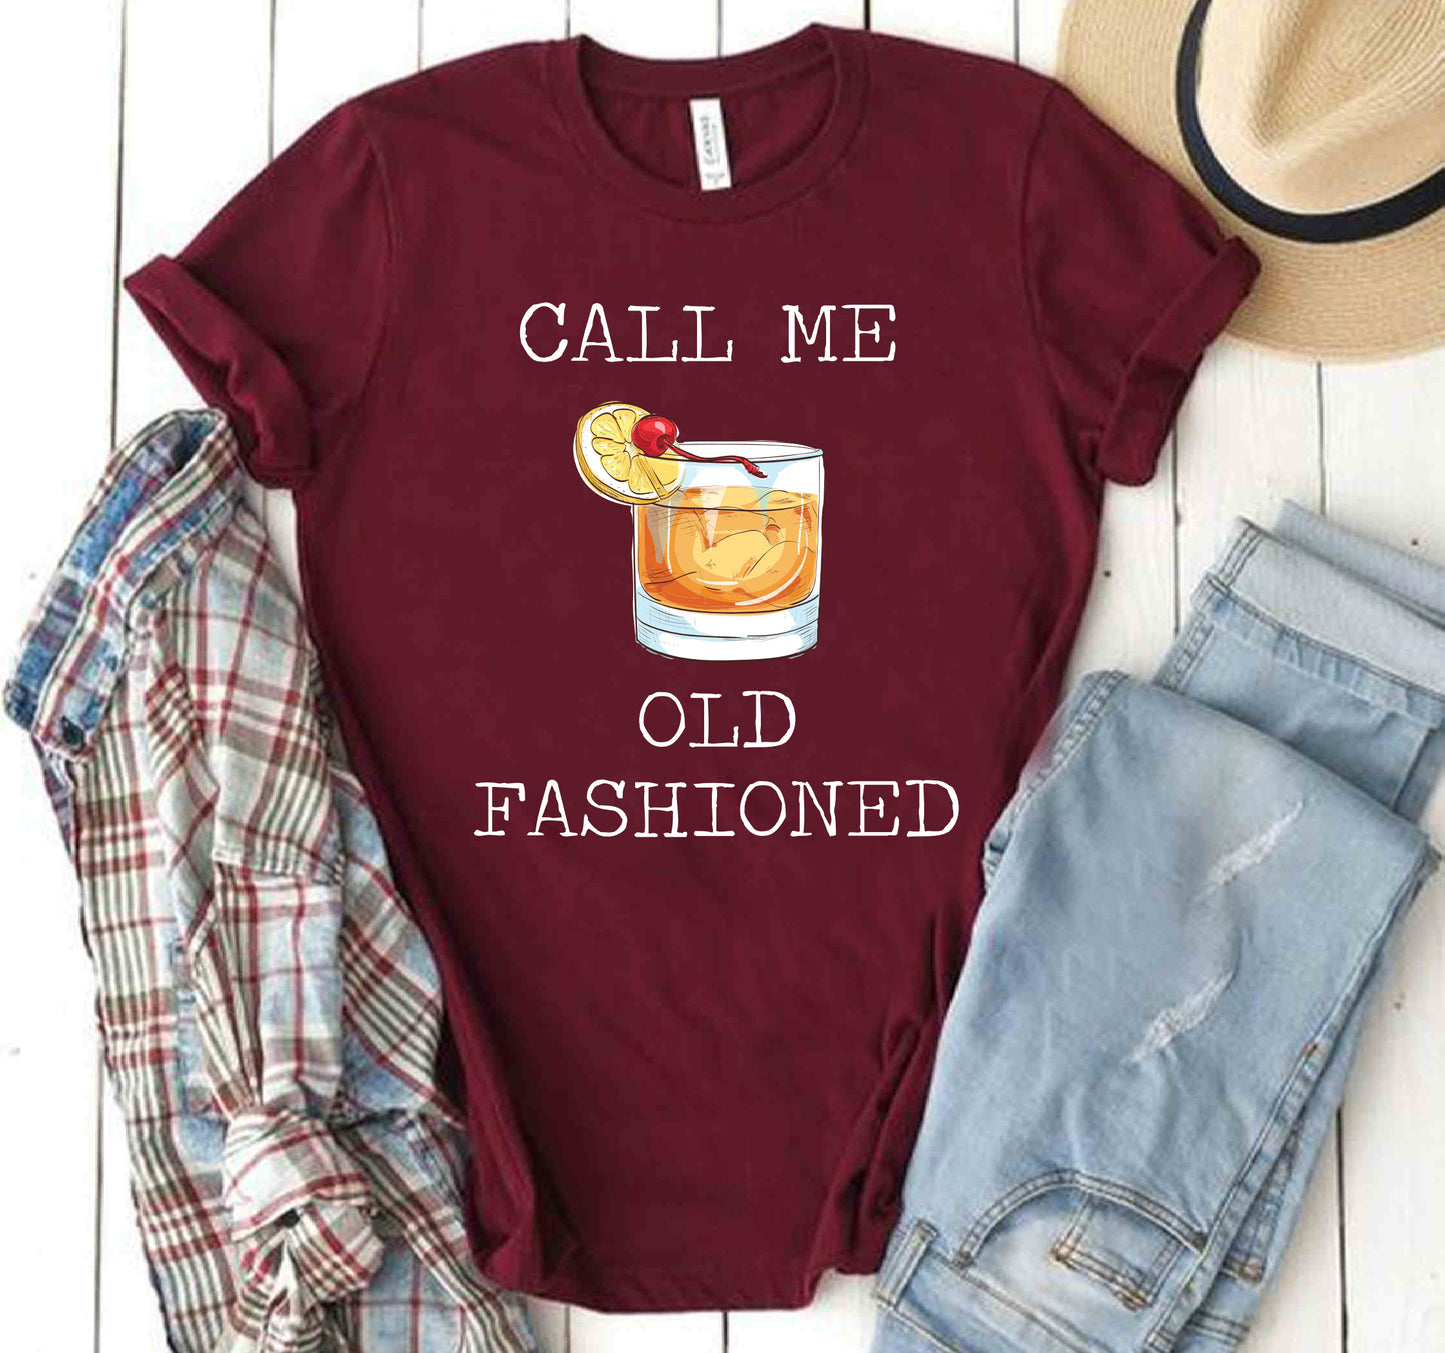 How Old Fashioned are you?